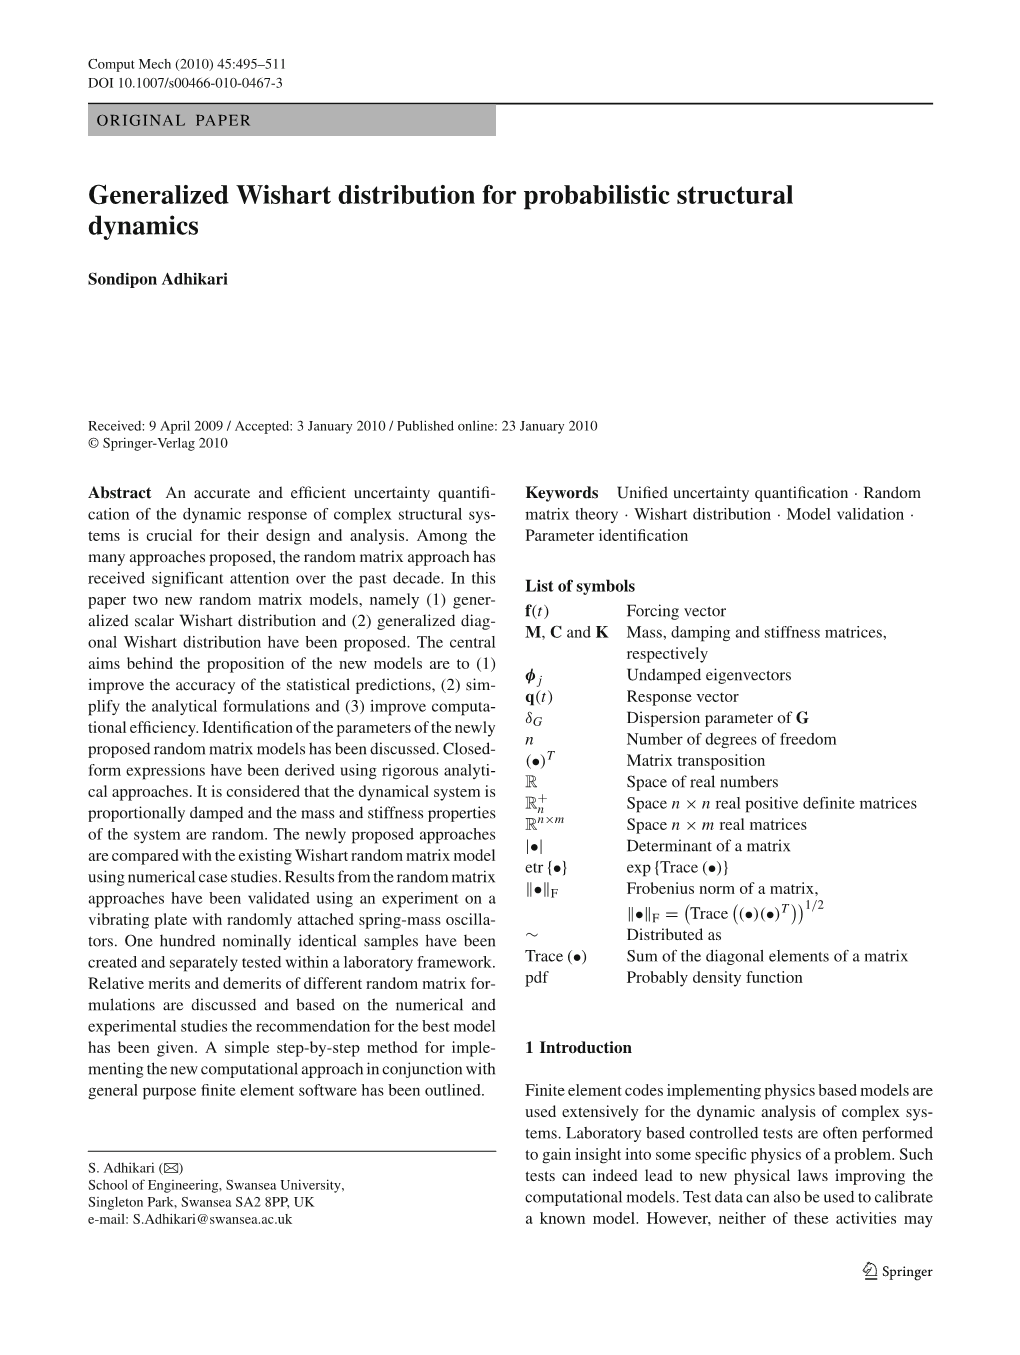 Generalized Wishart Distribution for Probabilistic Structural Dynamics